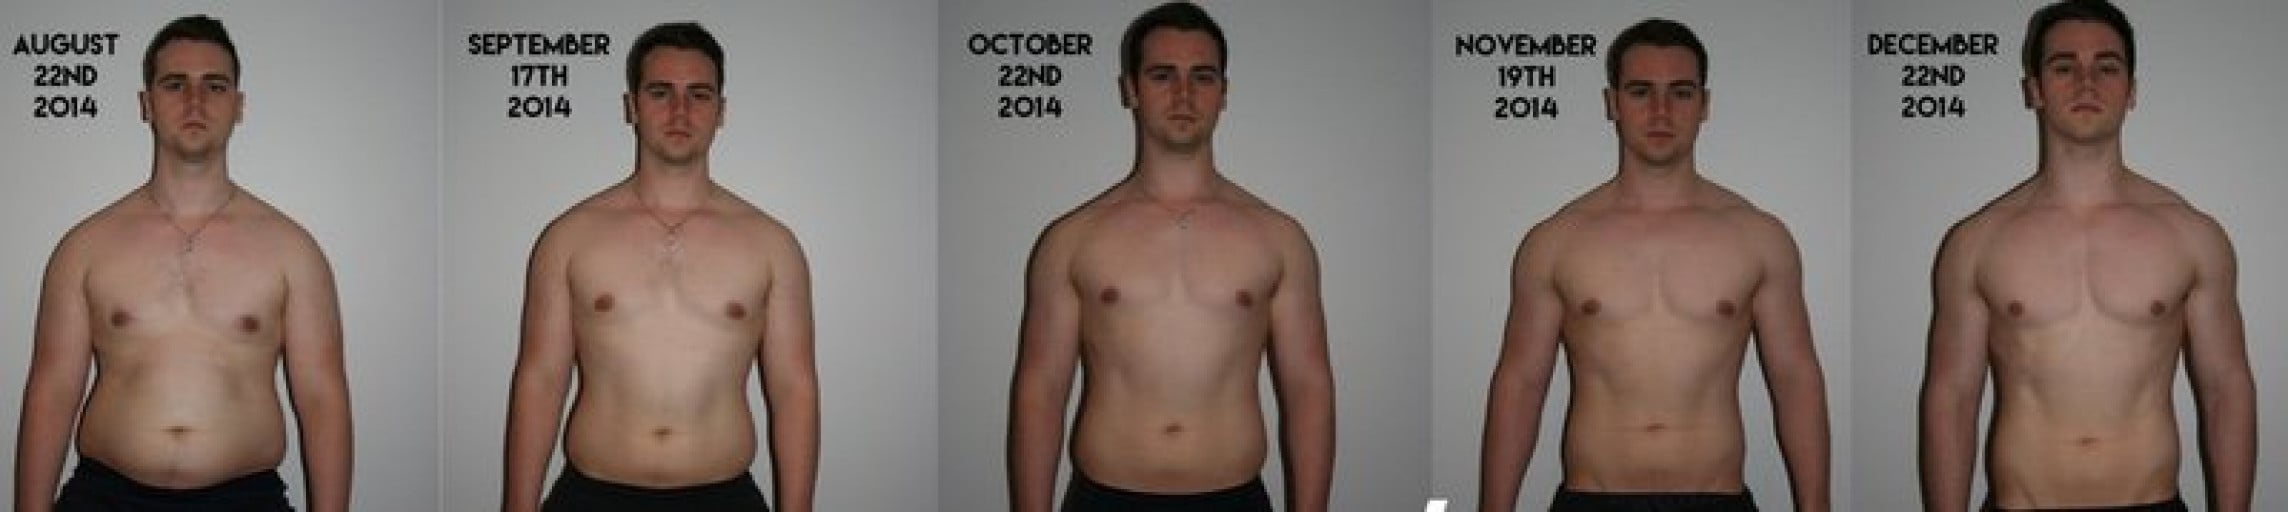 A photo of a 5'11" man showing a weight cut from 210 pounds to 175 pounds. A net loss of 35 pounds.